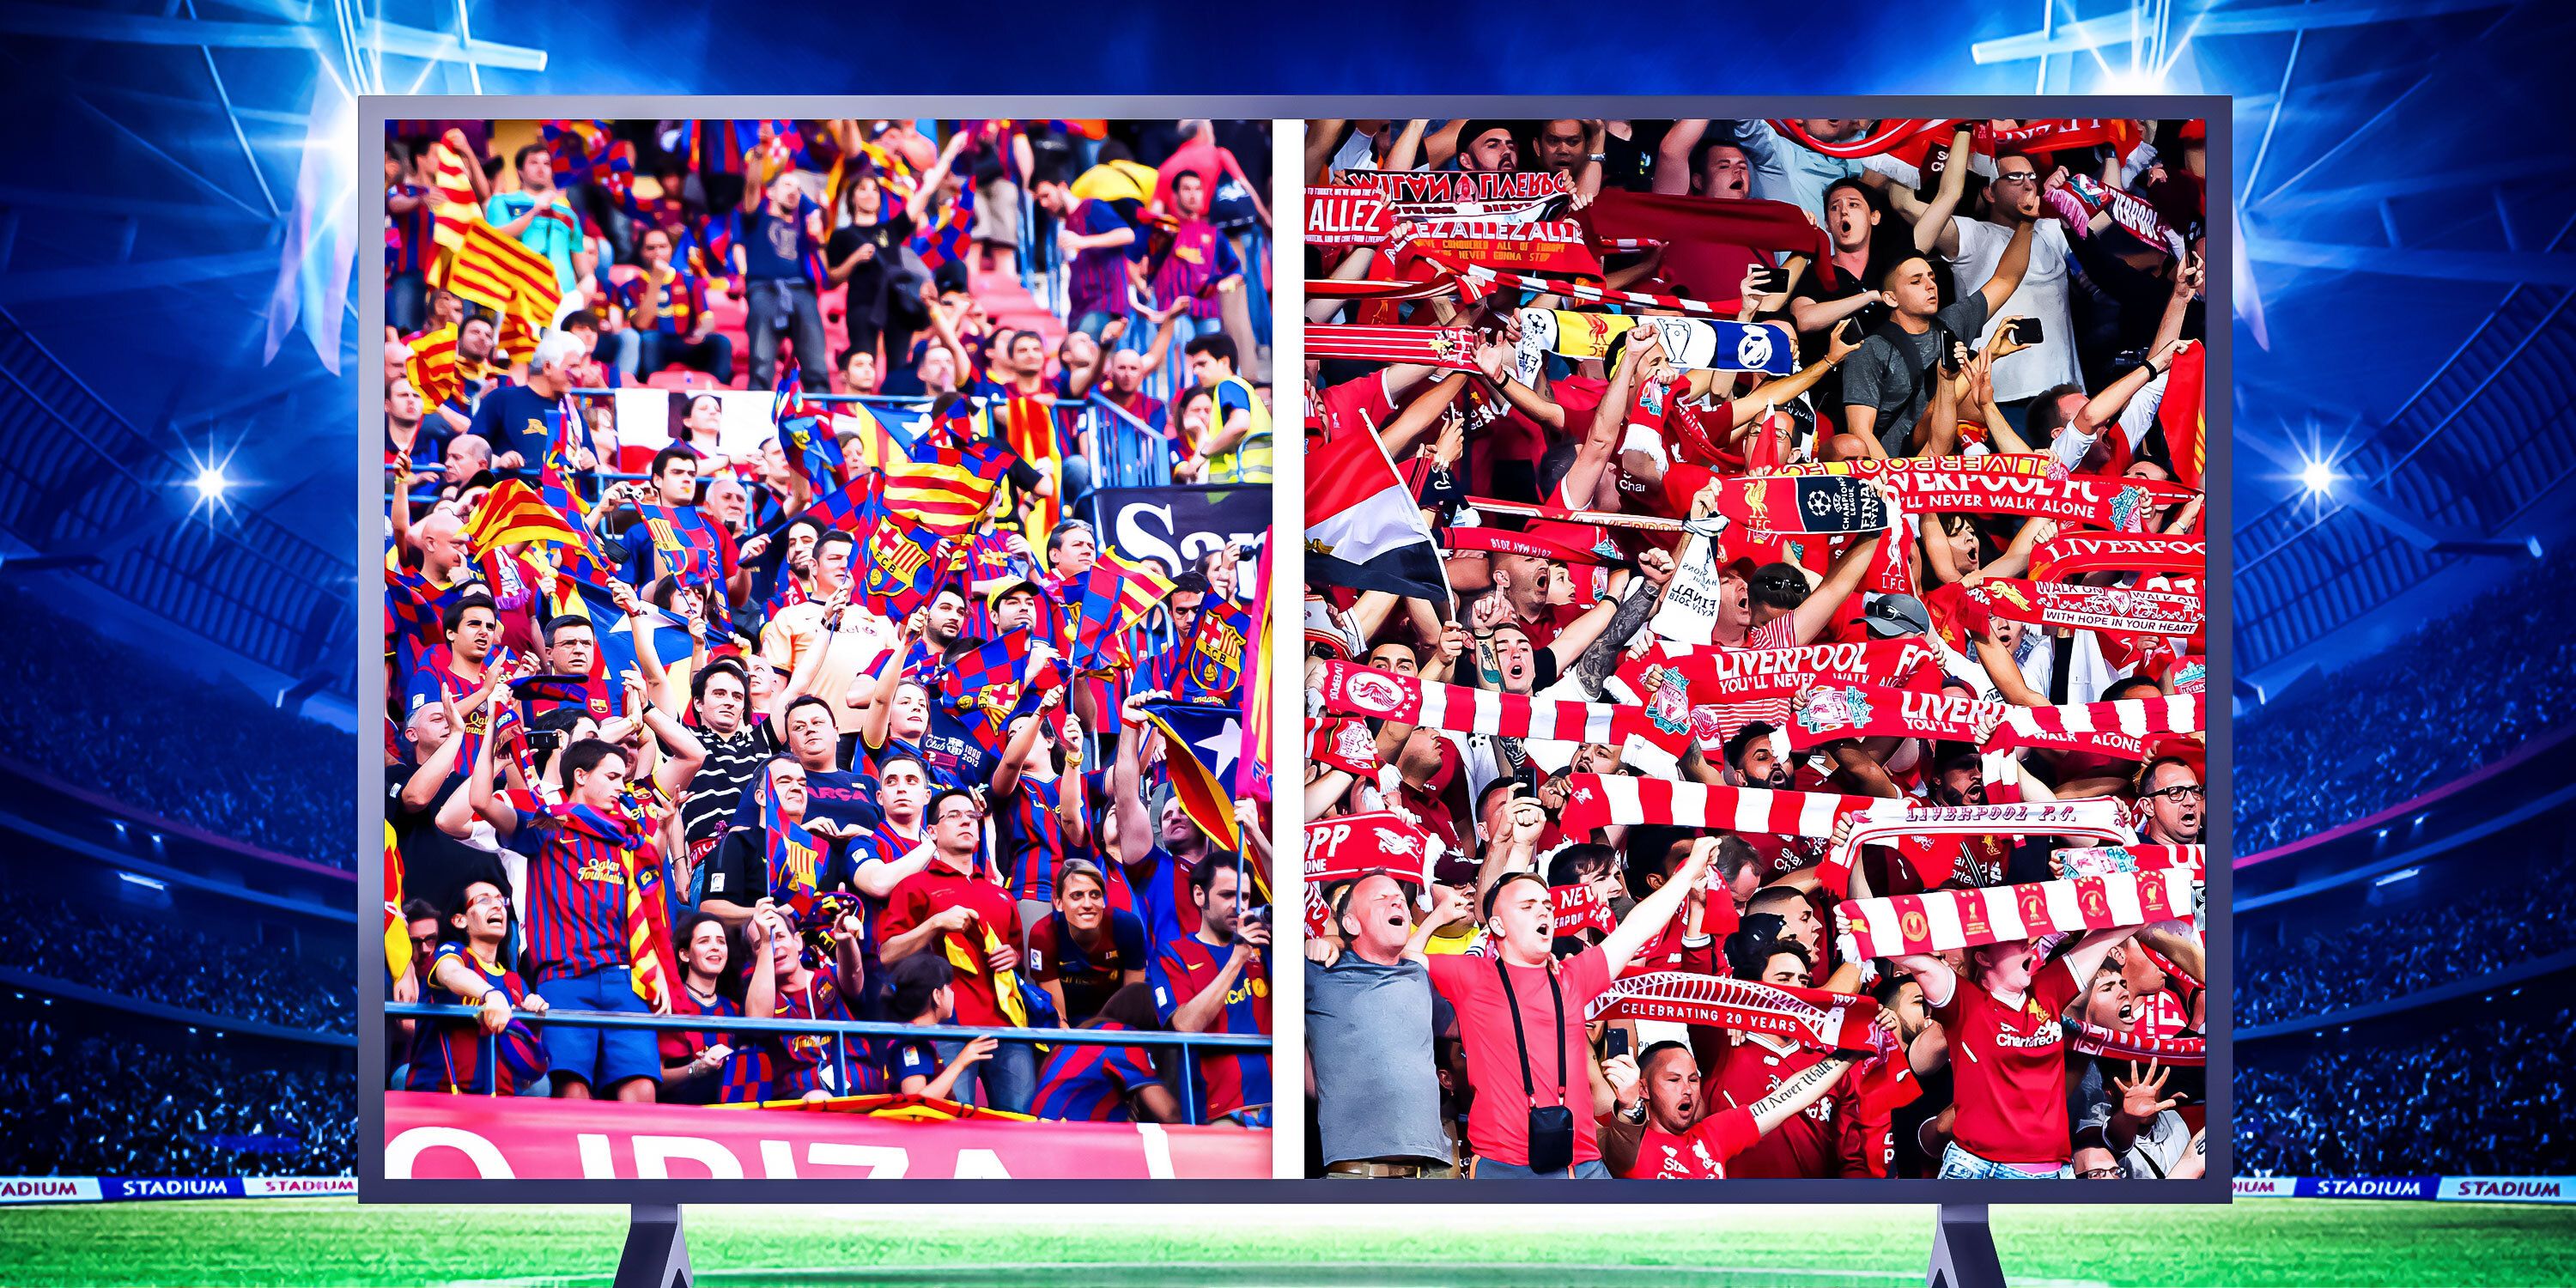 A custom image of Barcelona and Liverpool fans belting out their famous club anthems